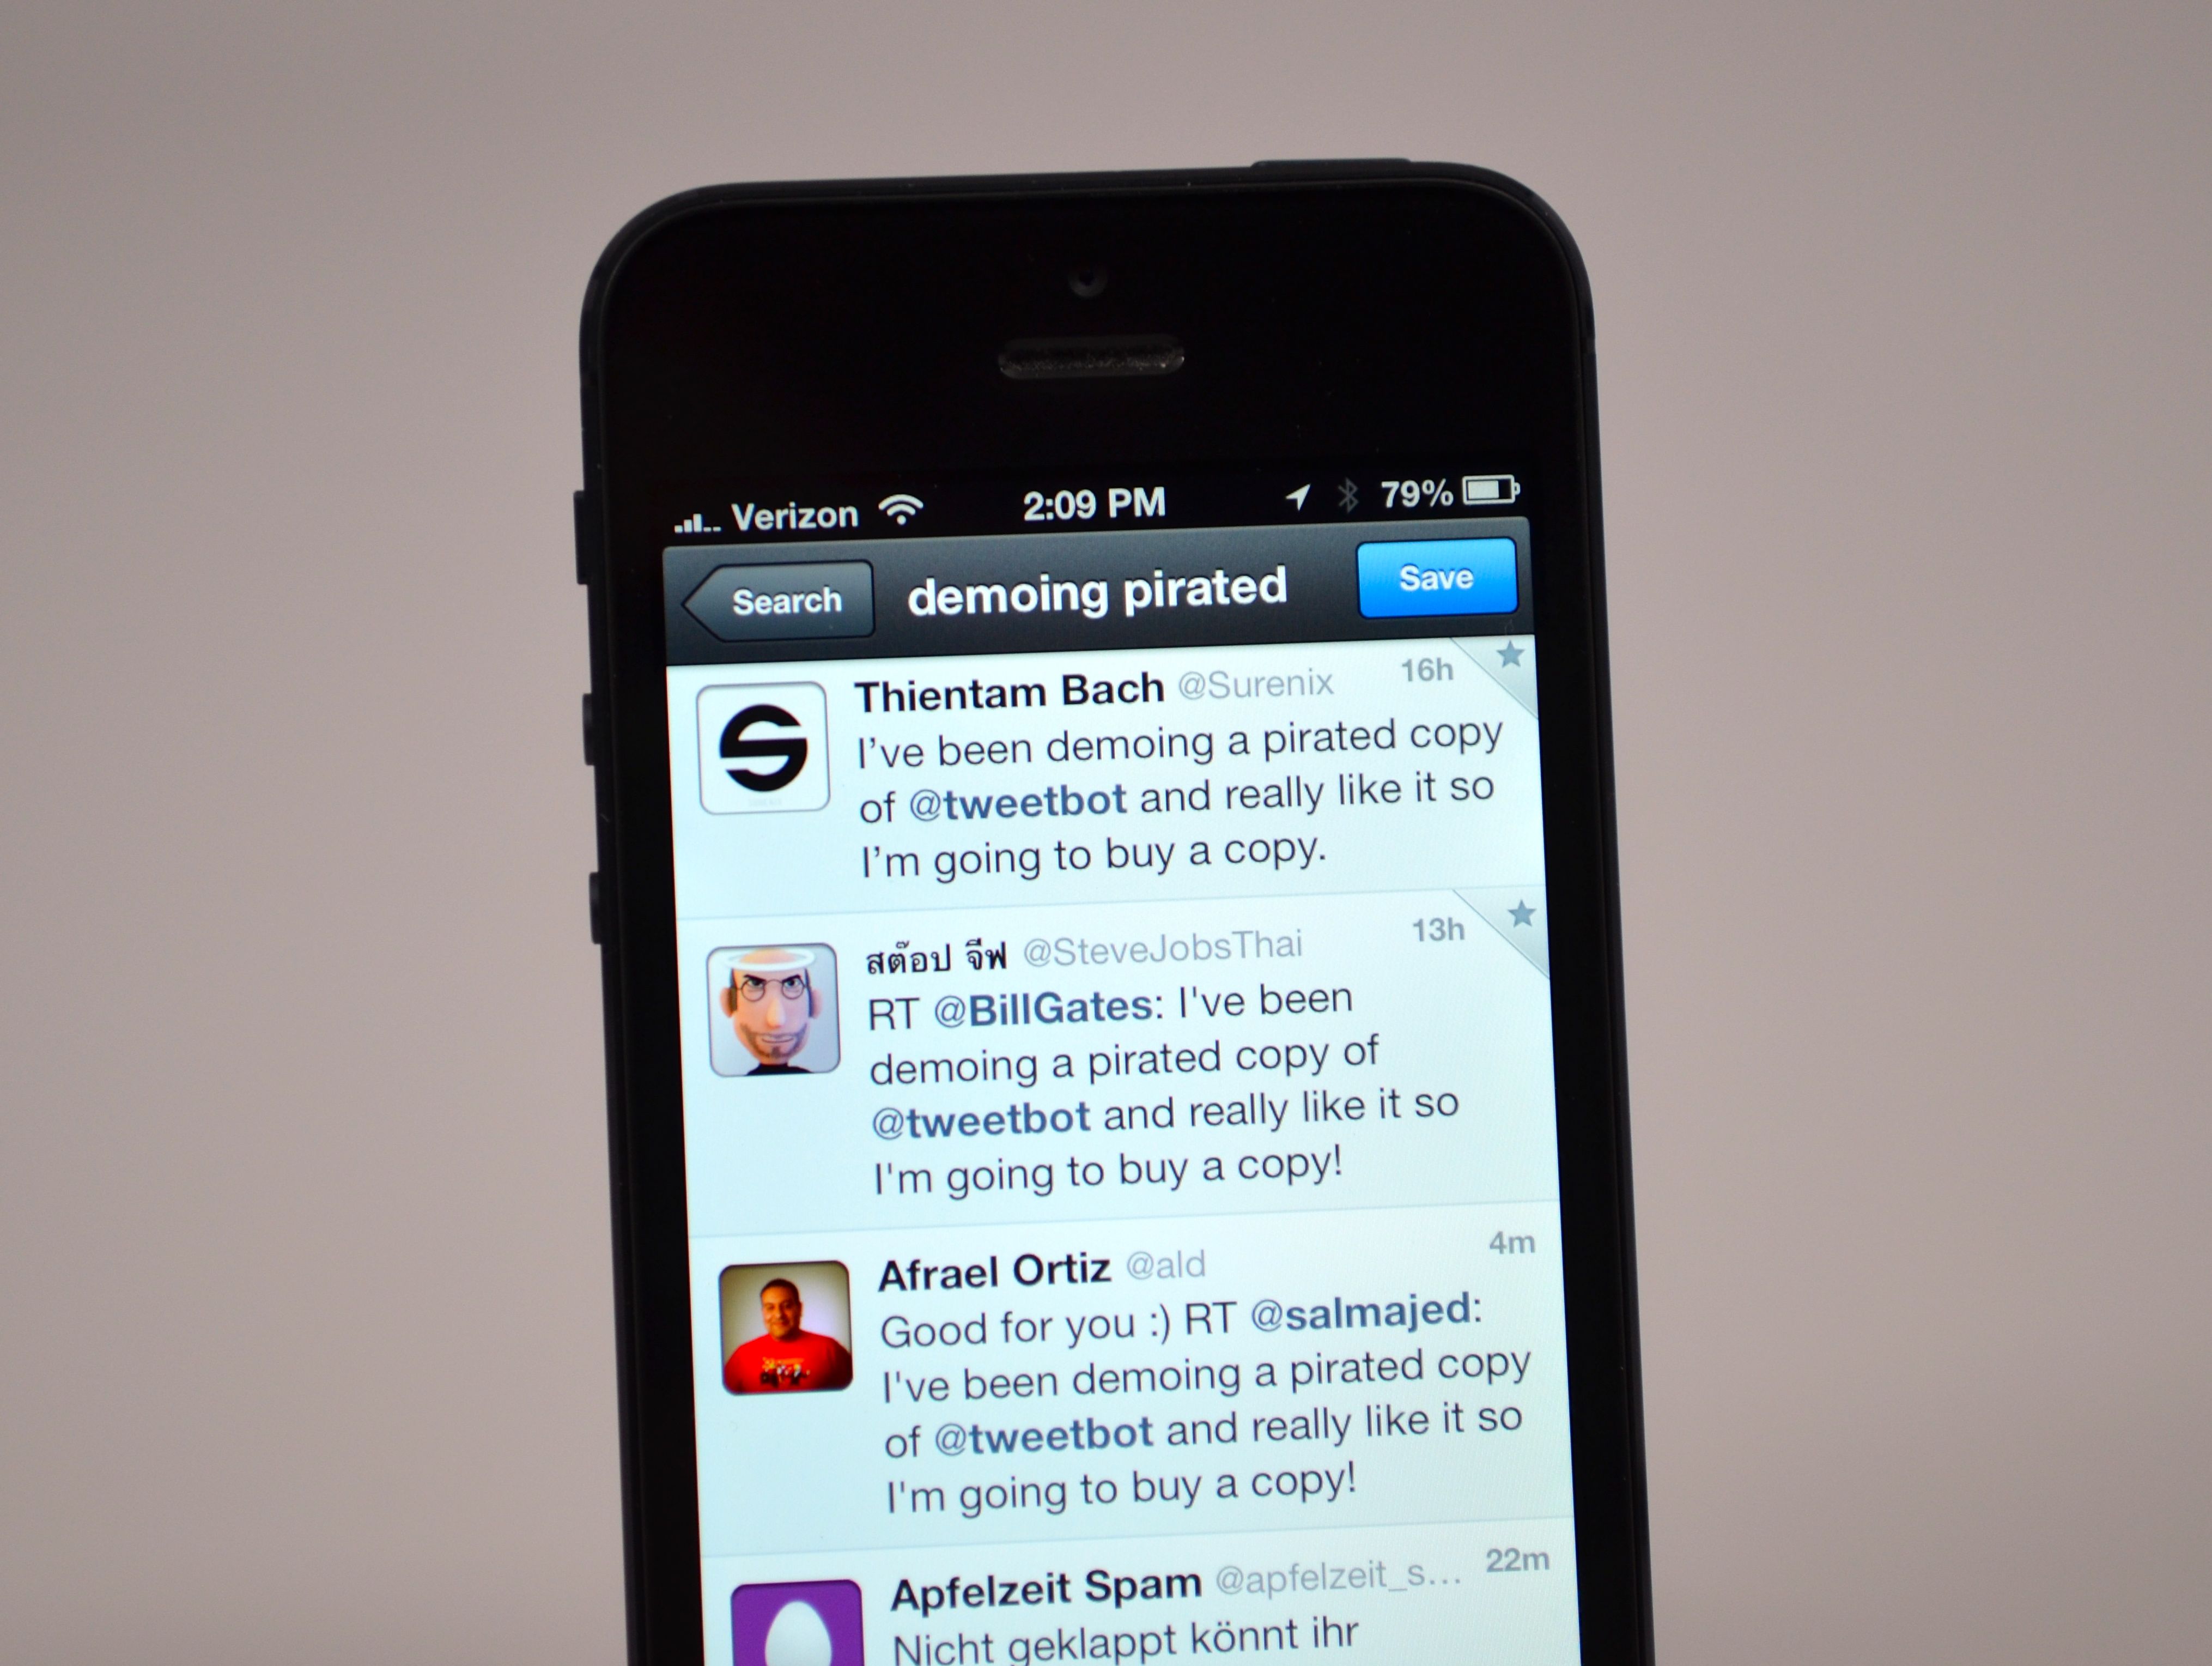 Installous alternatives like AppCake allow piracy on the iPhone, and Tweetbot is trying to shame pirates.